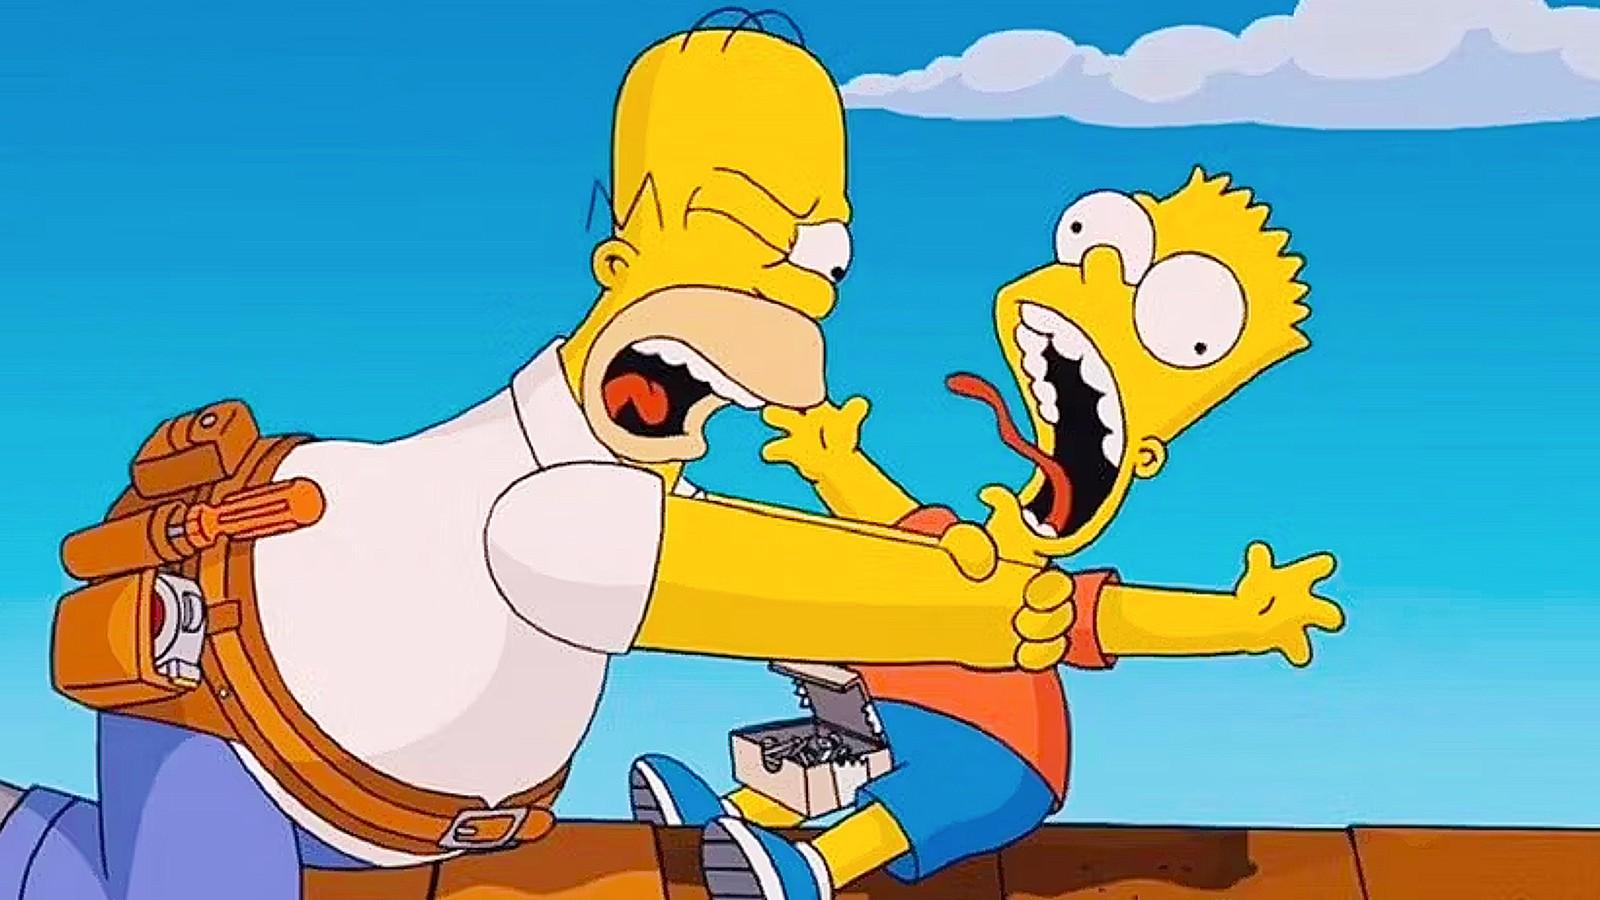 Homer strangling Bart in The Simpsons